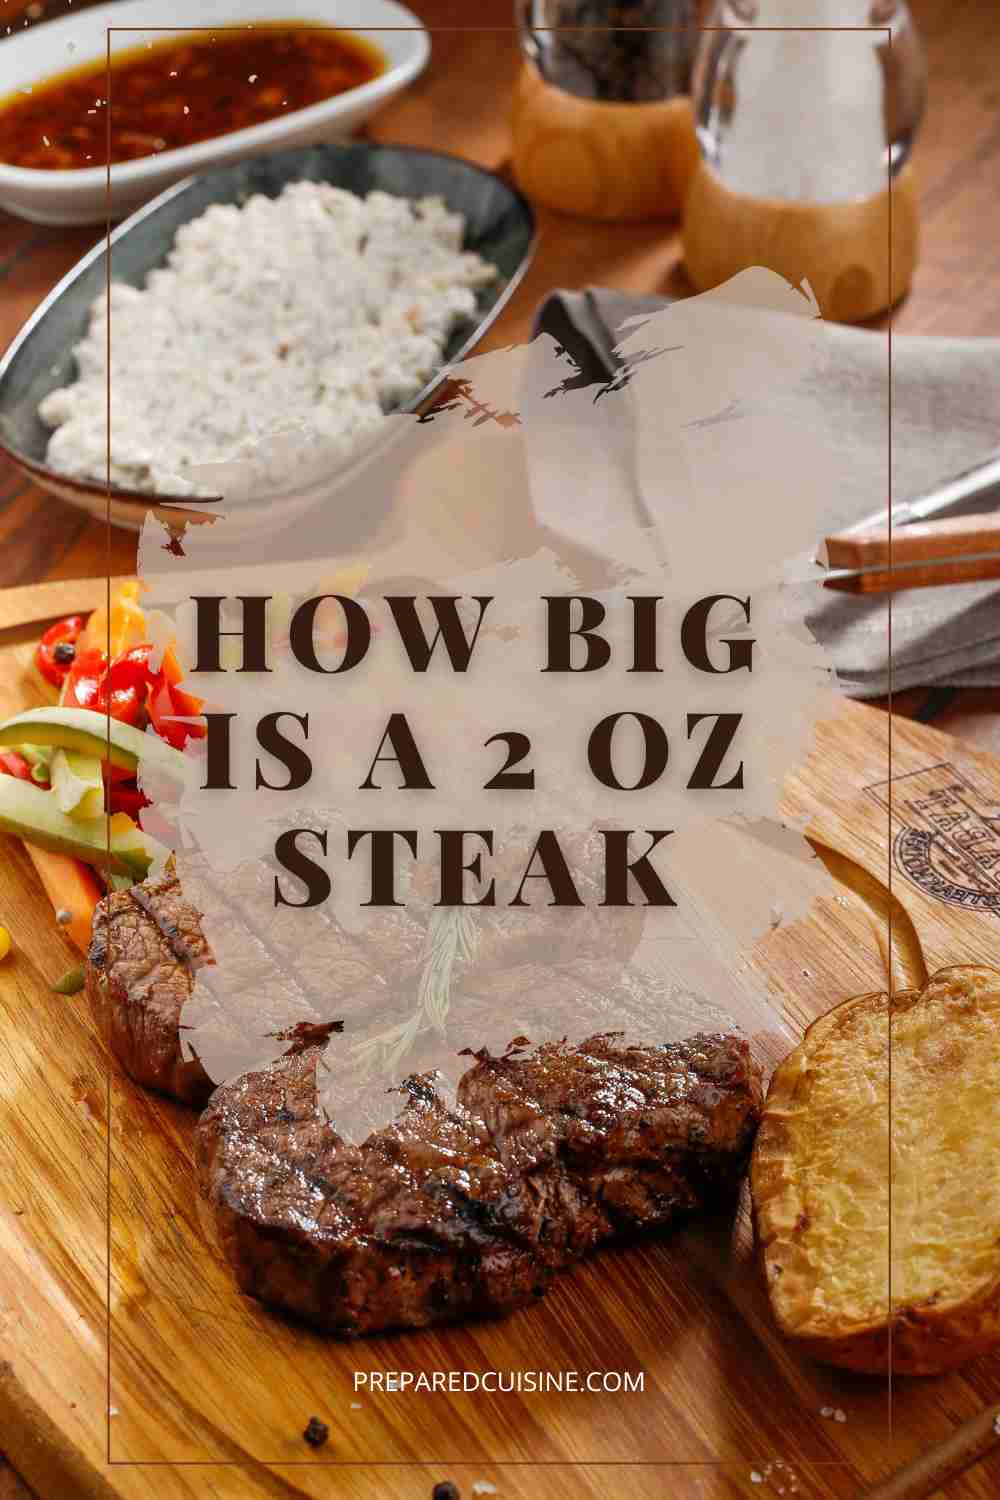 What Does 2 Oz of Steak Look Like